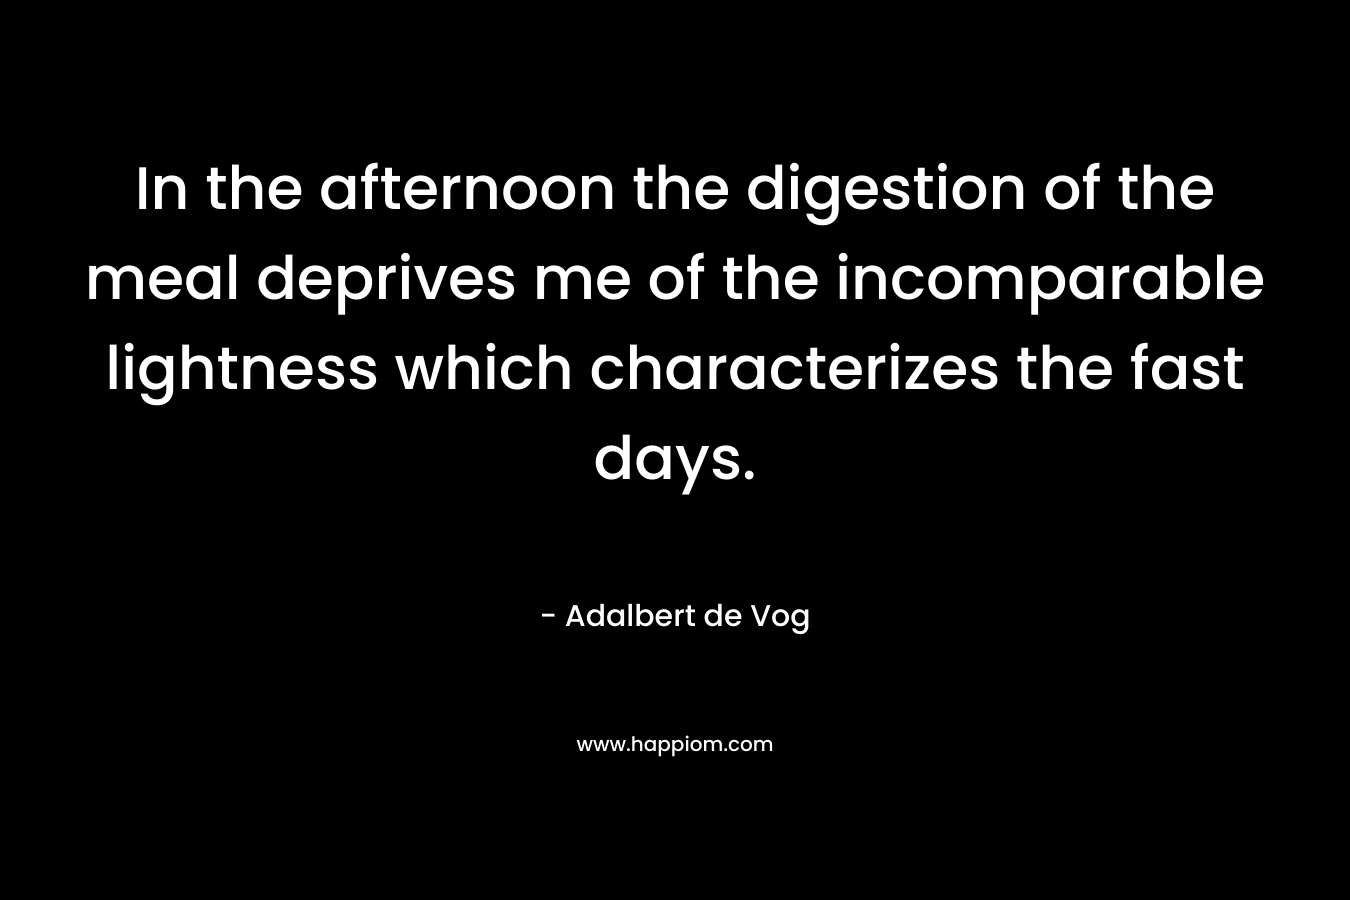 In the afternoon the digestion of the meal deprives me of the incomparable lightness which characterizes the fast days. – Adalbert de Vog